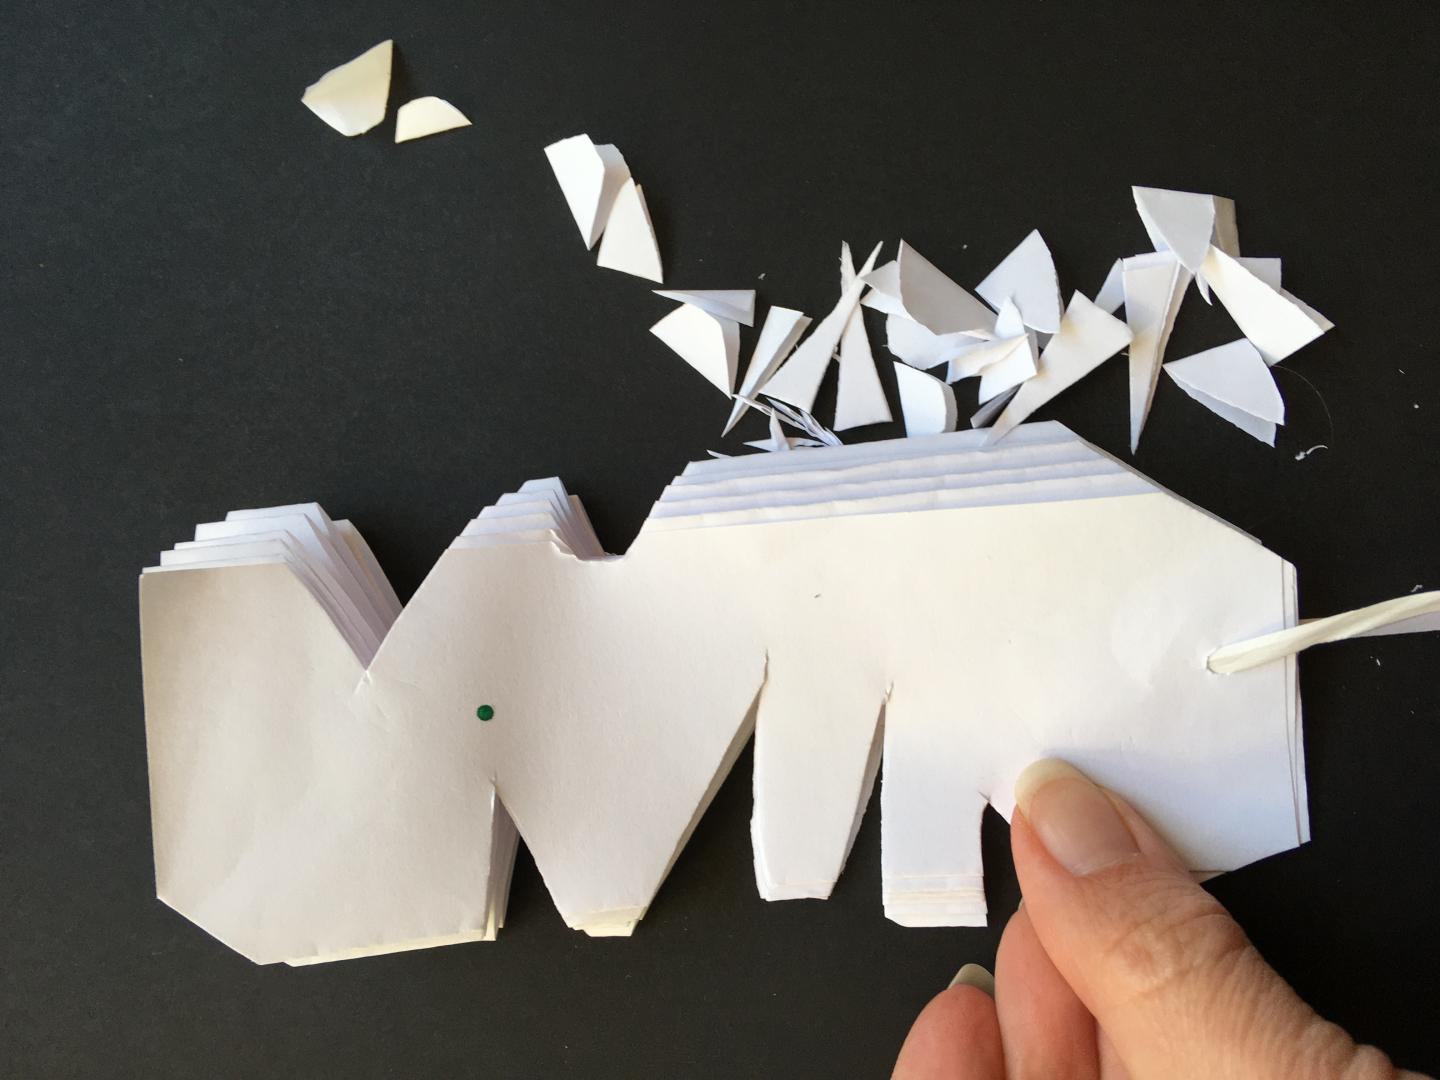 Cut shapes into pleated paper.